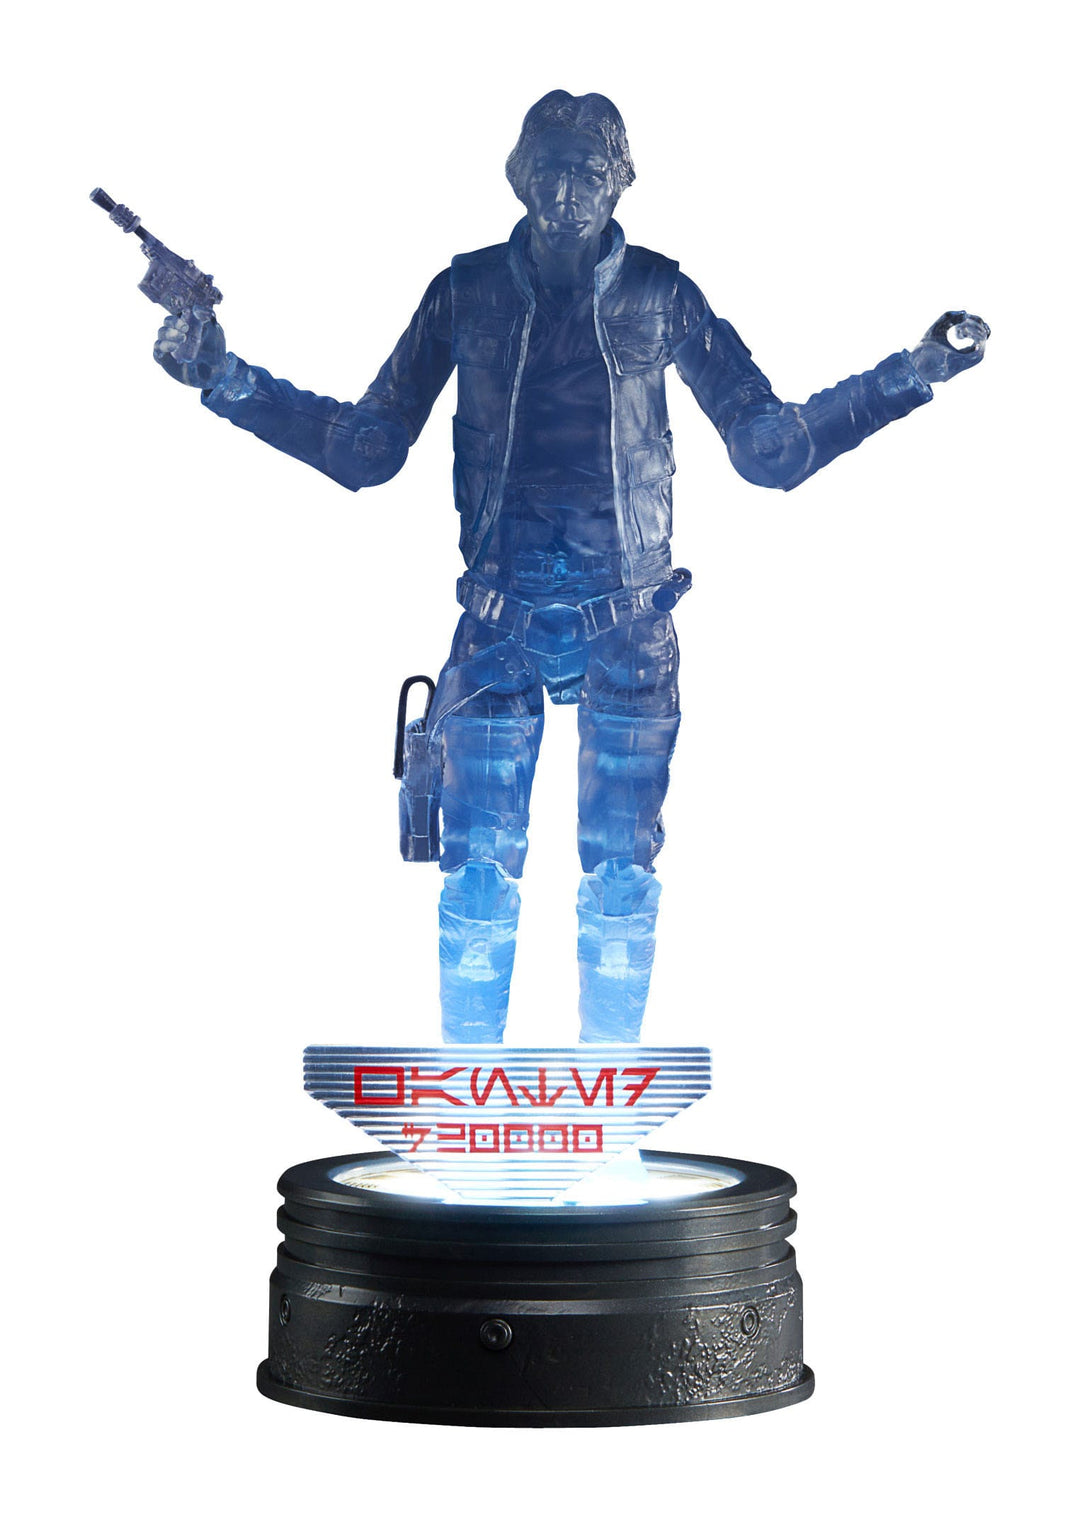 Star Wars The Black Series Holocomm Collection Han Solo 6" Action Figure